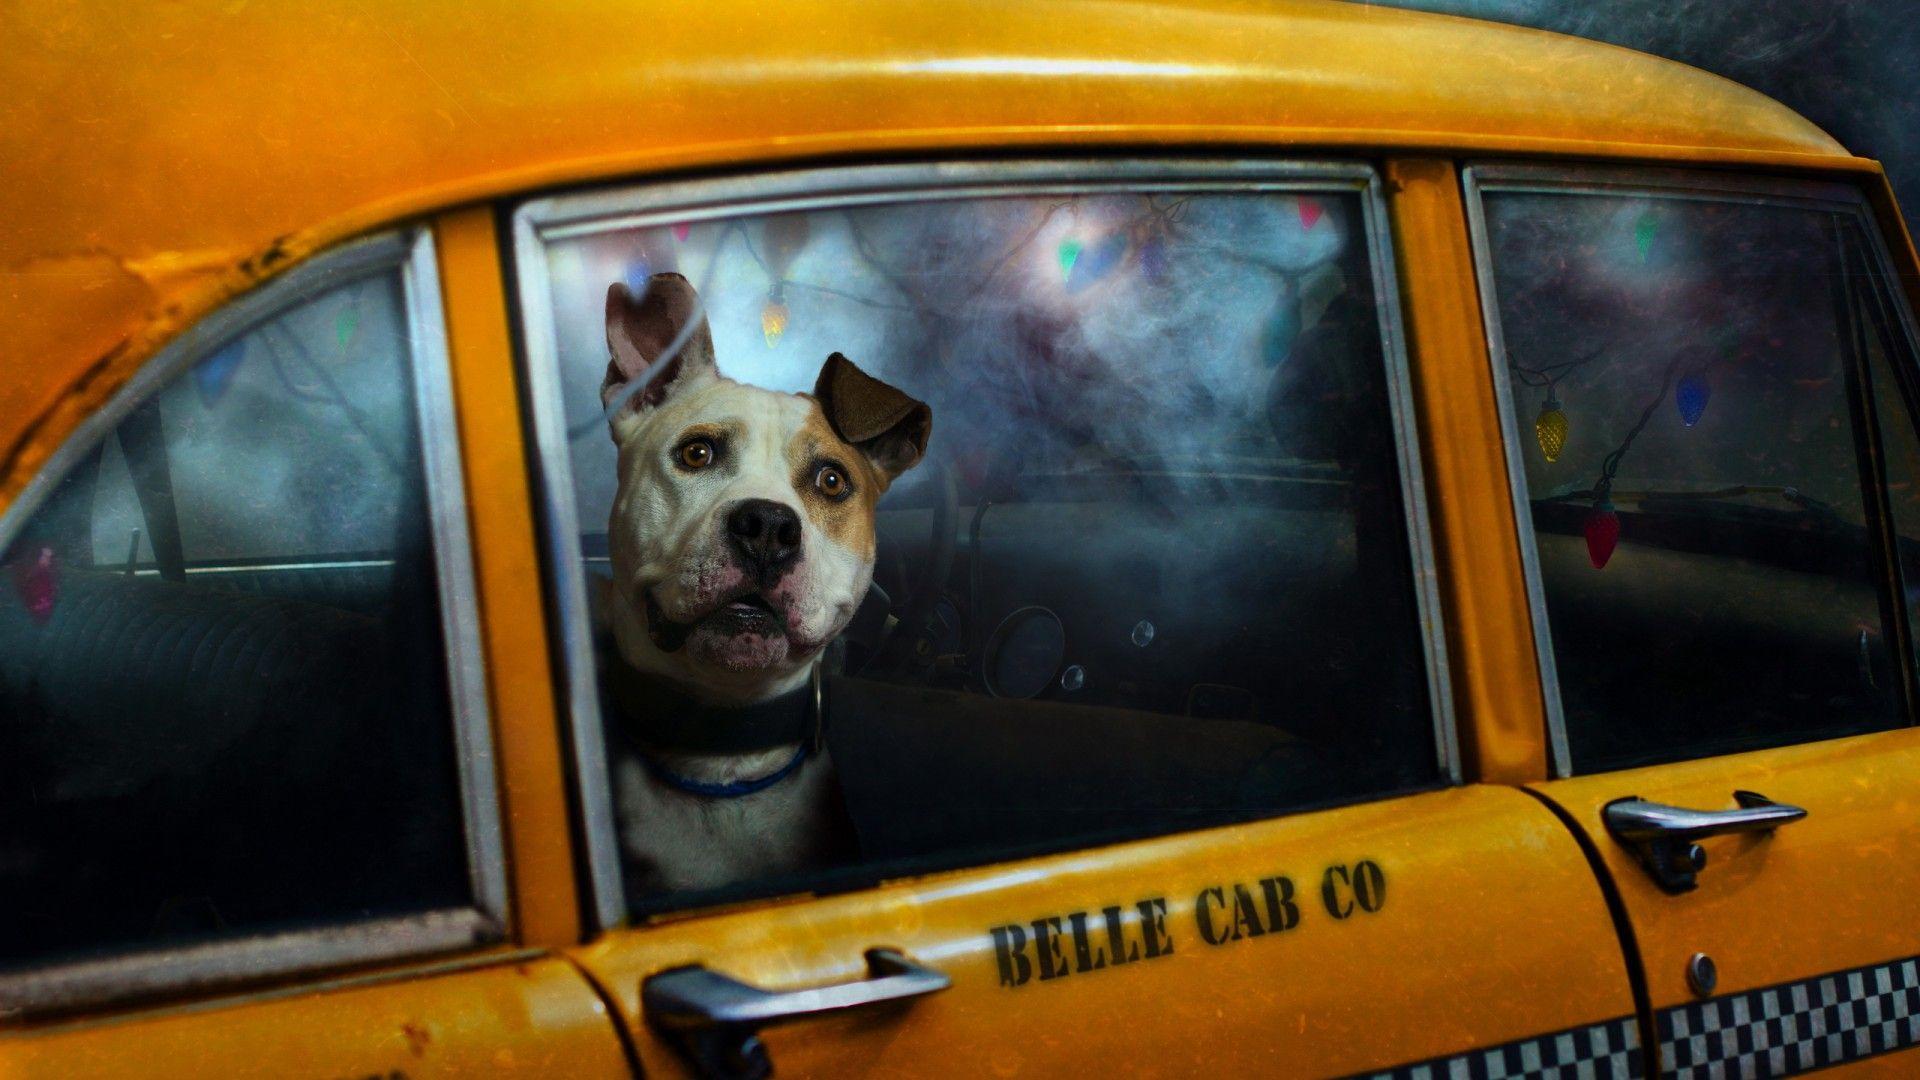 Dog in a taxi wallpaper and image, picture, photo